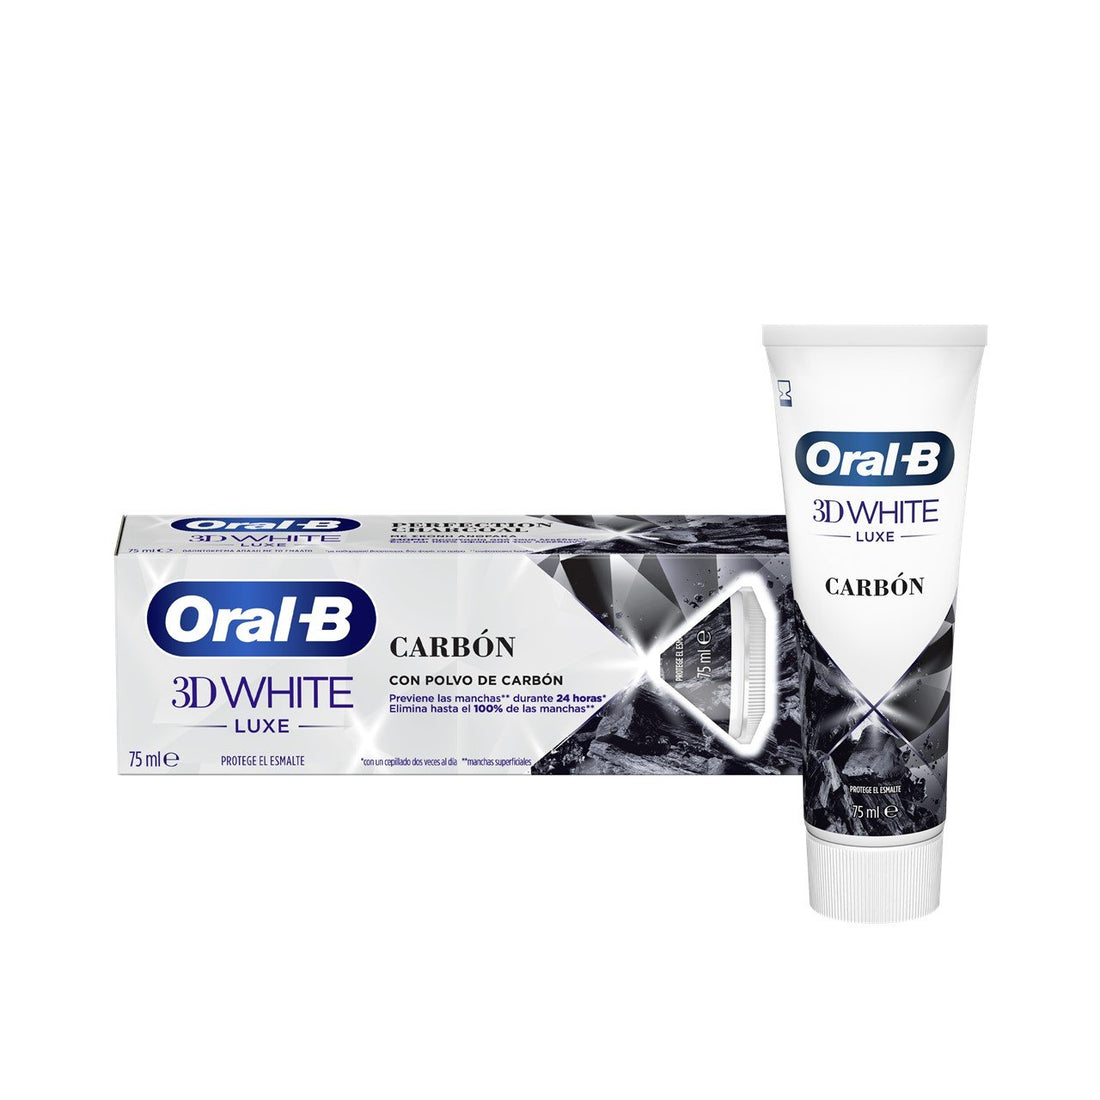 Oral-B 3D White Luxe Perfection Dentifrice Blanchissant au Charbon 75 ml